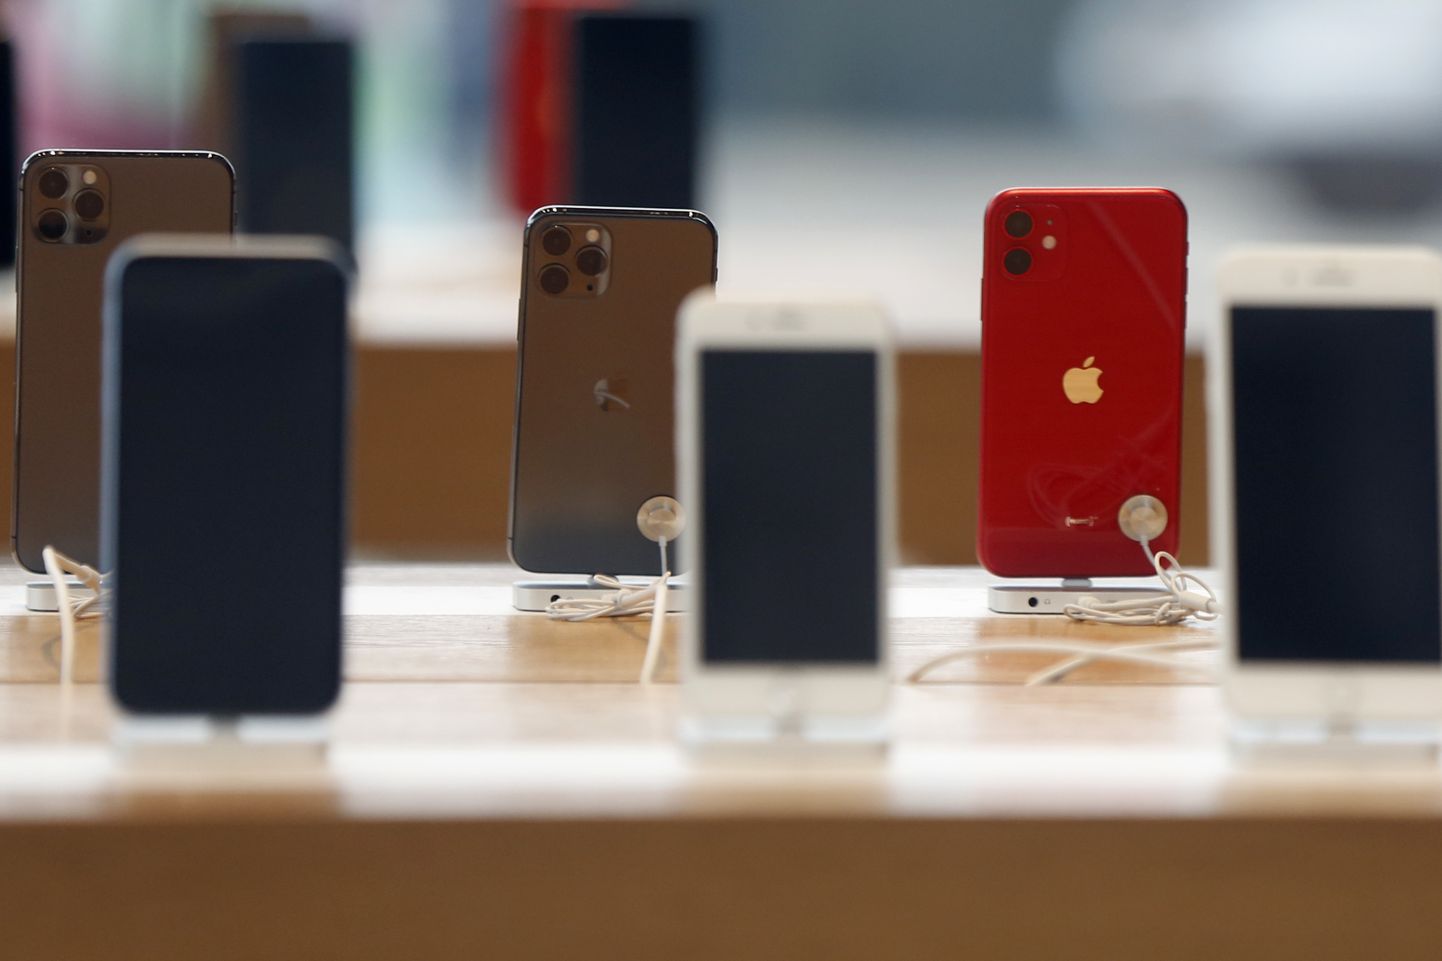 Rows of iPhones are displayed Saturday, March 14, 2020, inside a closed Apple store in downtown Brooklyn in New York. Apple CEO Tim Cook announced the tech giant would close all Apple retail stores outside of China to help stem the global spread of the coronavirus. (AP Photo/Kathy Willens)